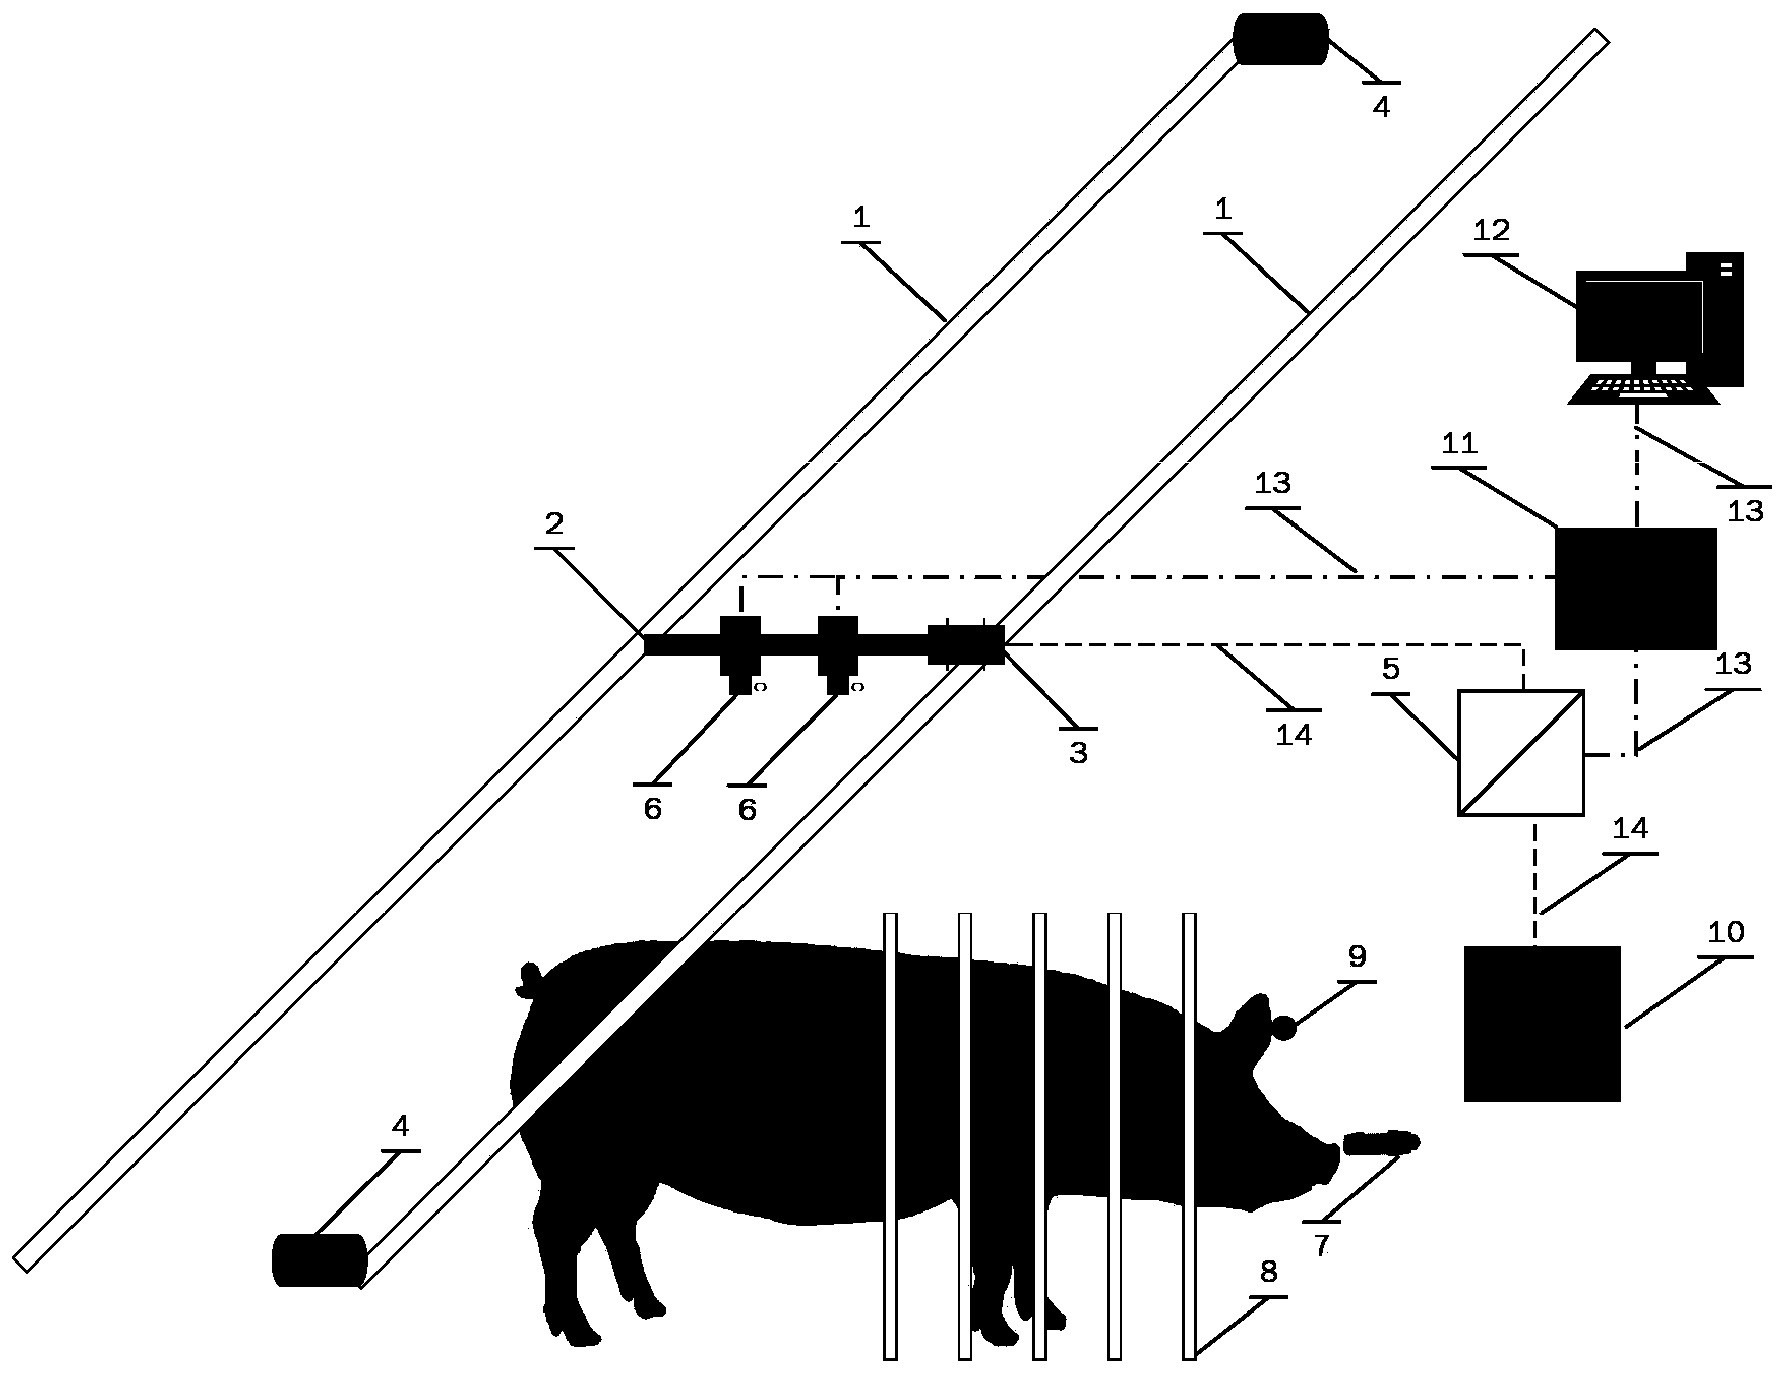 Mobile system for monitoring body sizes and weights of pigs in multiple pigsties